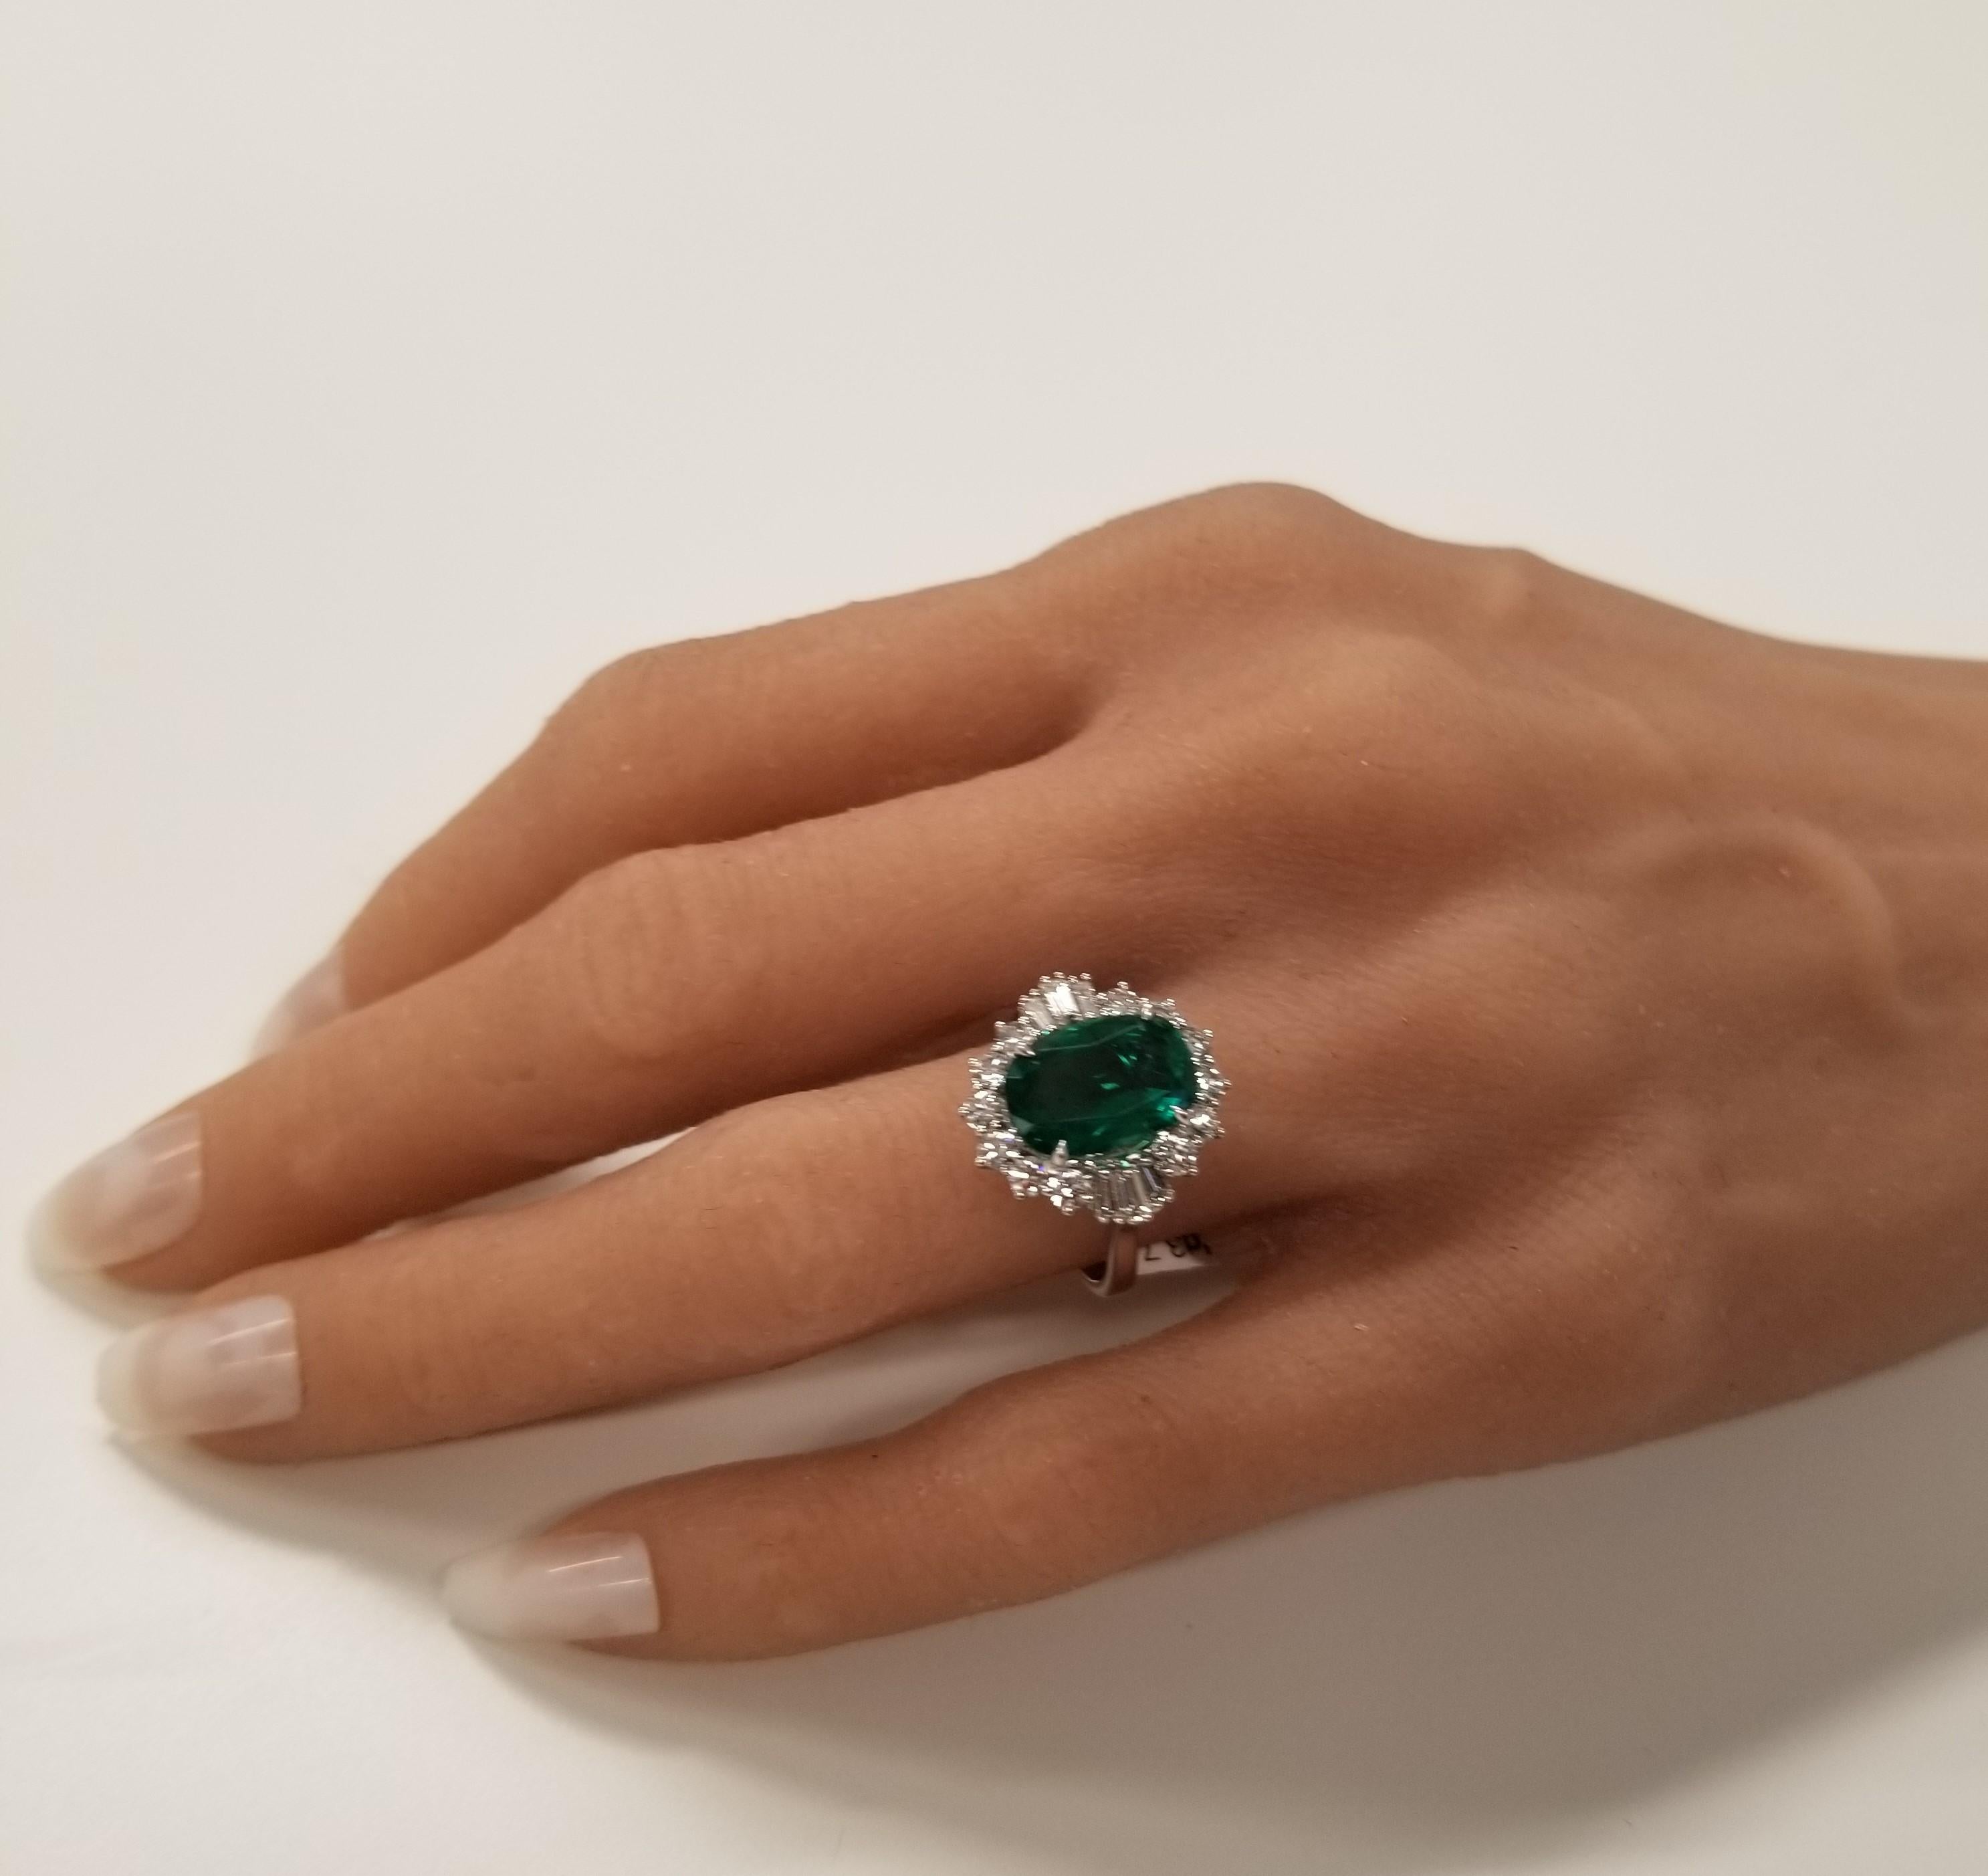 This is a vintage style ring that will make you feel like a princess. This stunning 3.74 carat emerald has the attributes of the top-end gem. Its clarity & transparency are excellent. Its origin is Brazil. Measuring 12.00 x 8.21 mm, it is vibrant